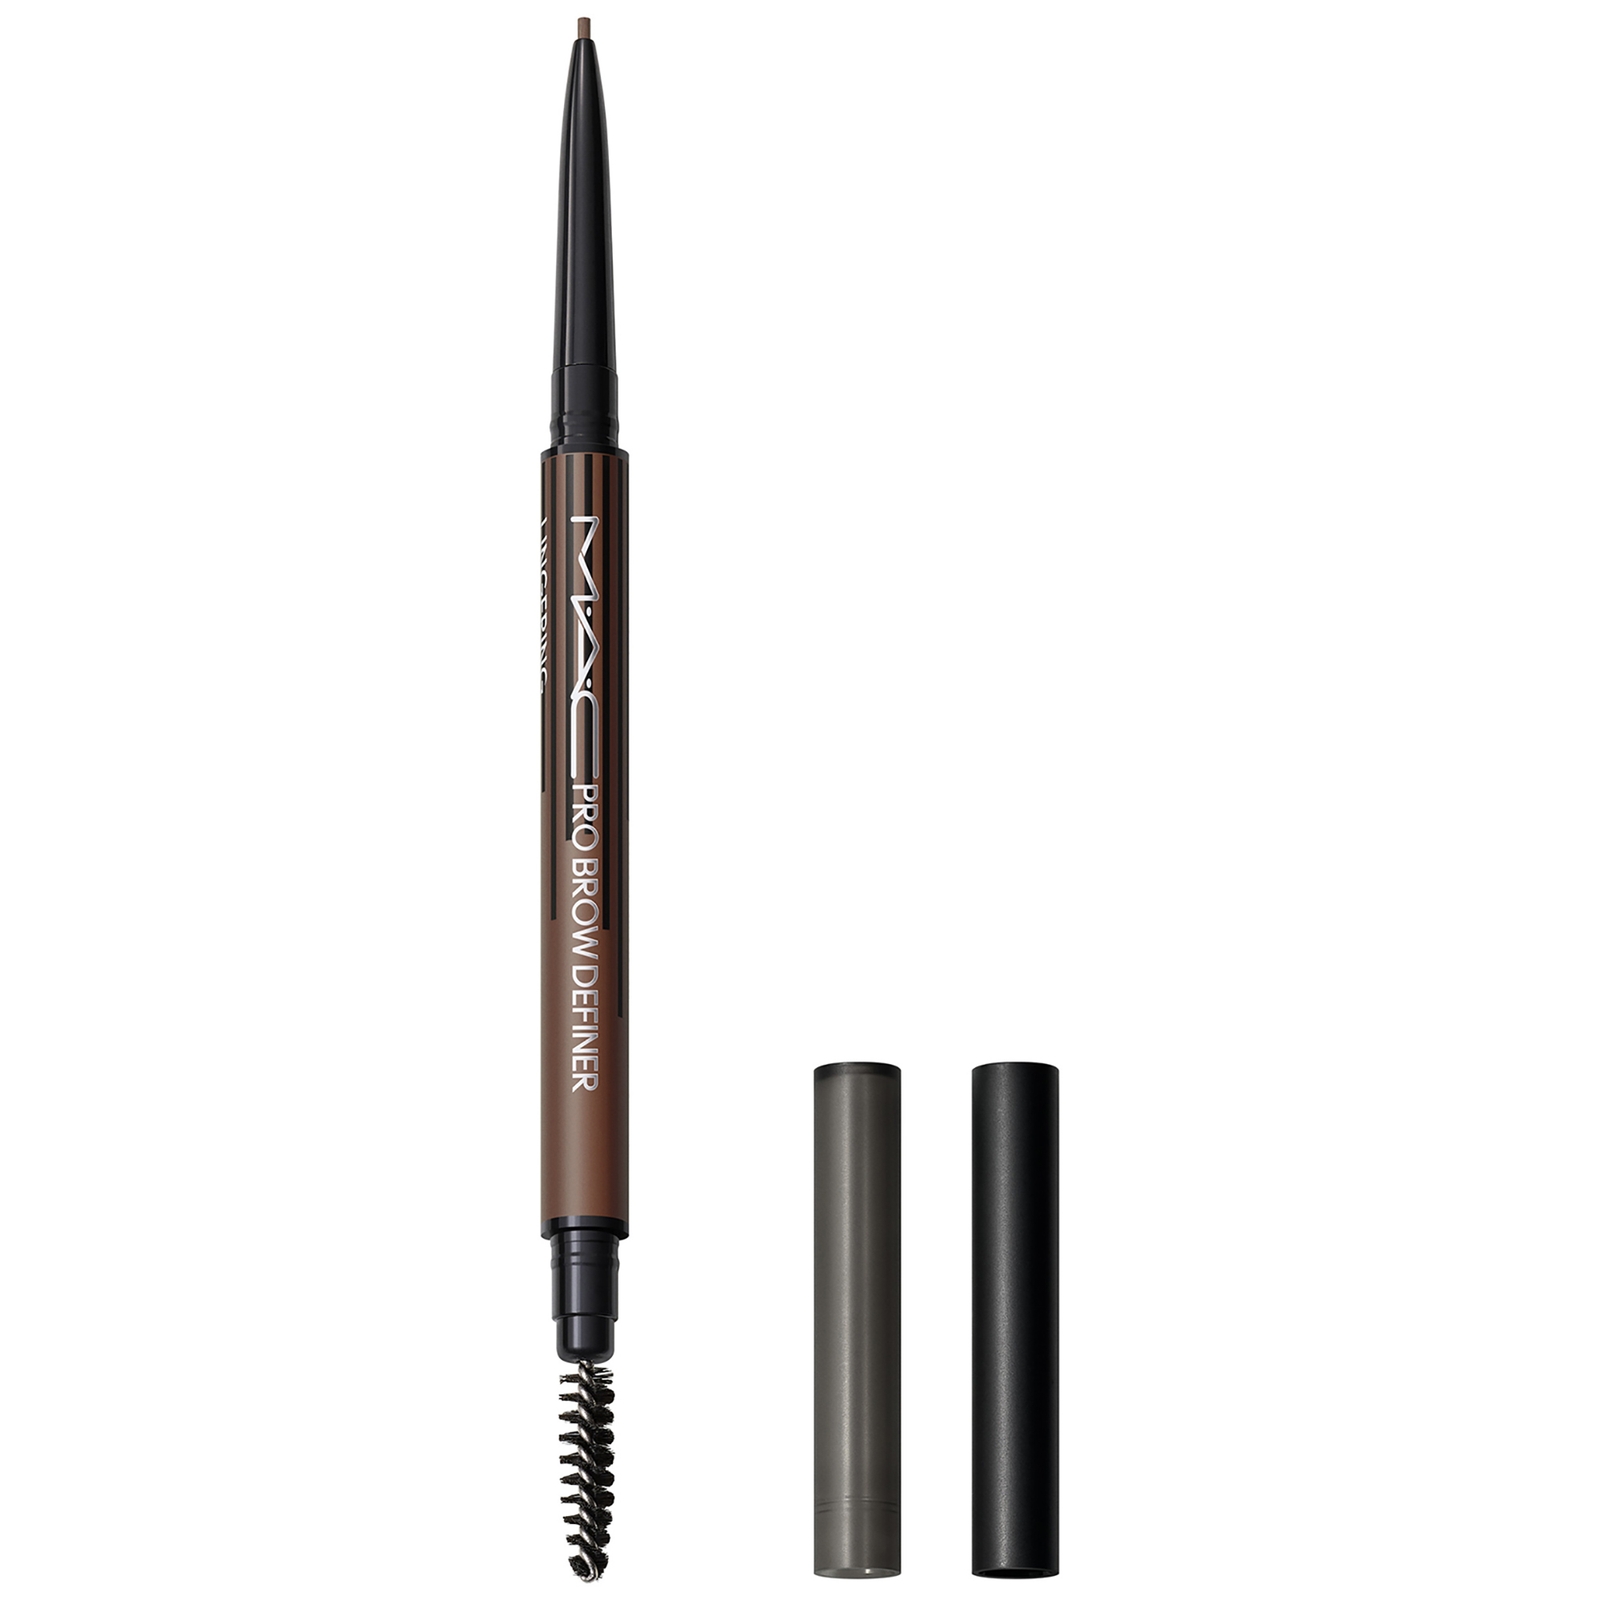 PRO BROW DEFINER 1MM-TIP BROW PENCIL 5G (VARIOUS SHADES) - LINGERING